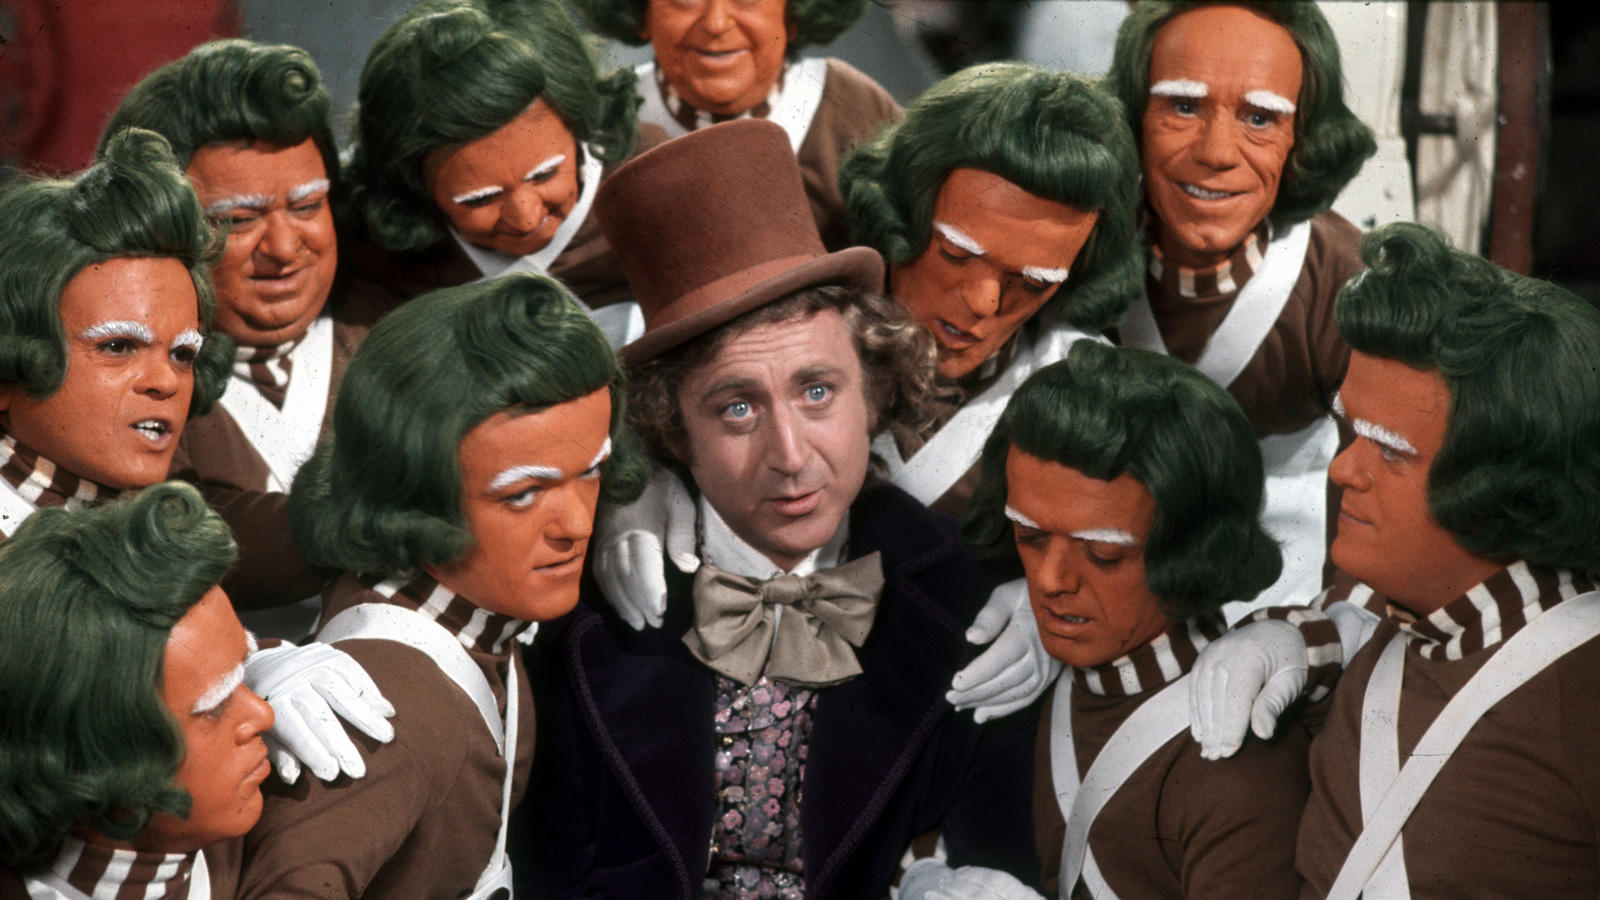 Willy Wonka and the Chocolate Factory (1972) film still